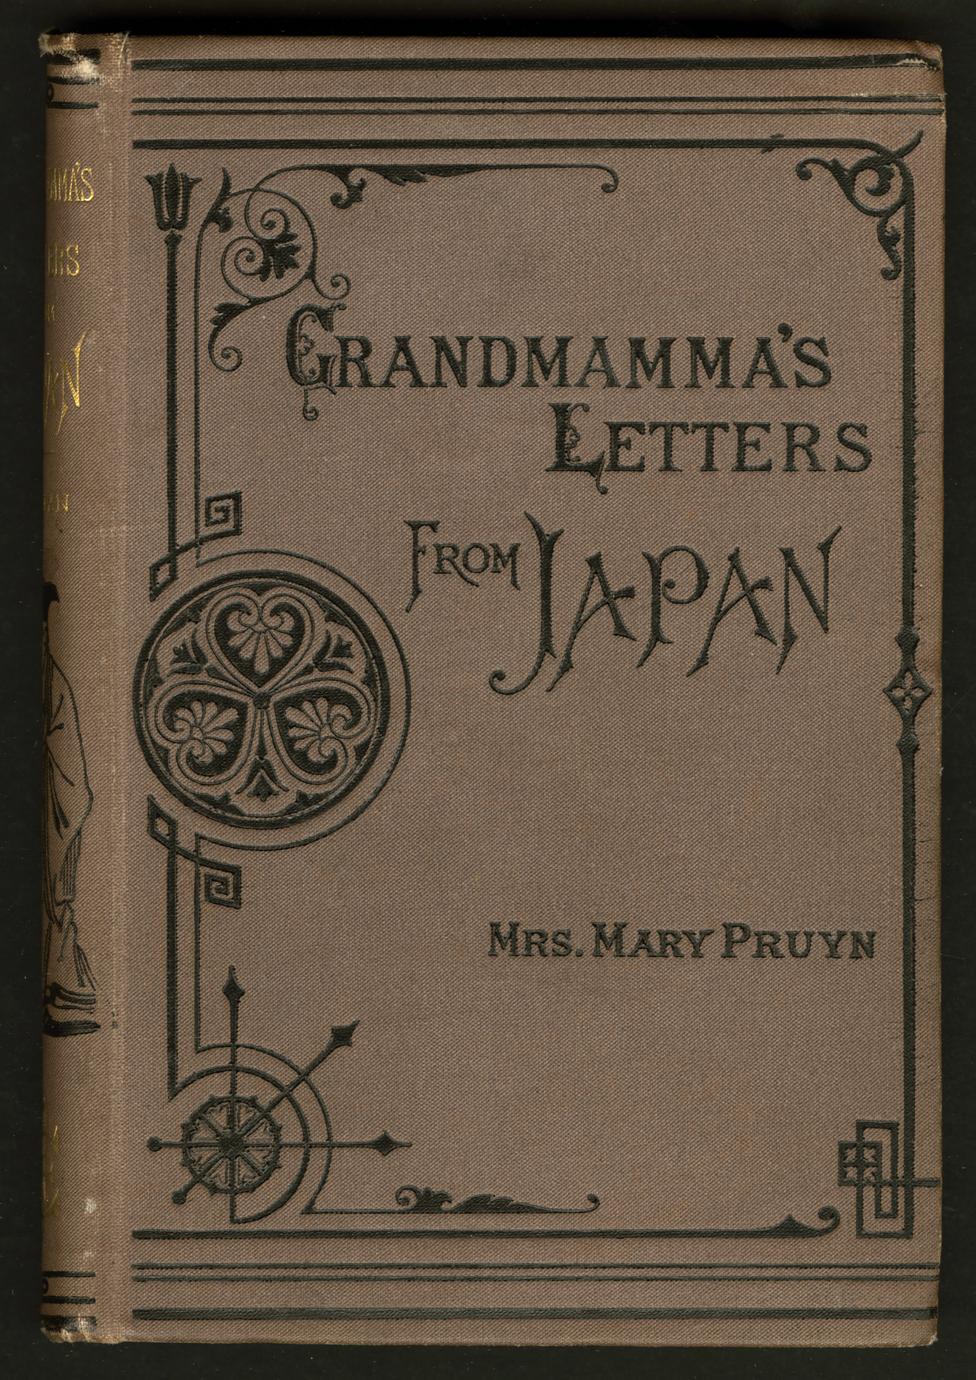 Grandmamma's letters from Japan (1 of 4)